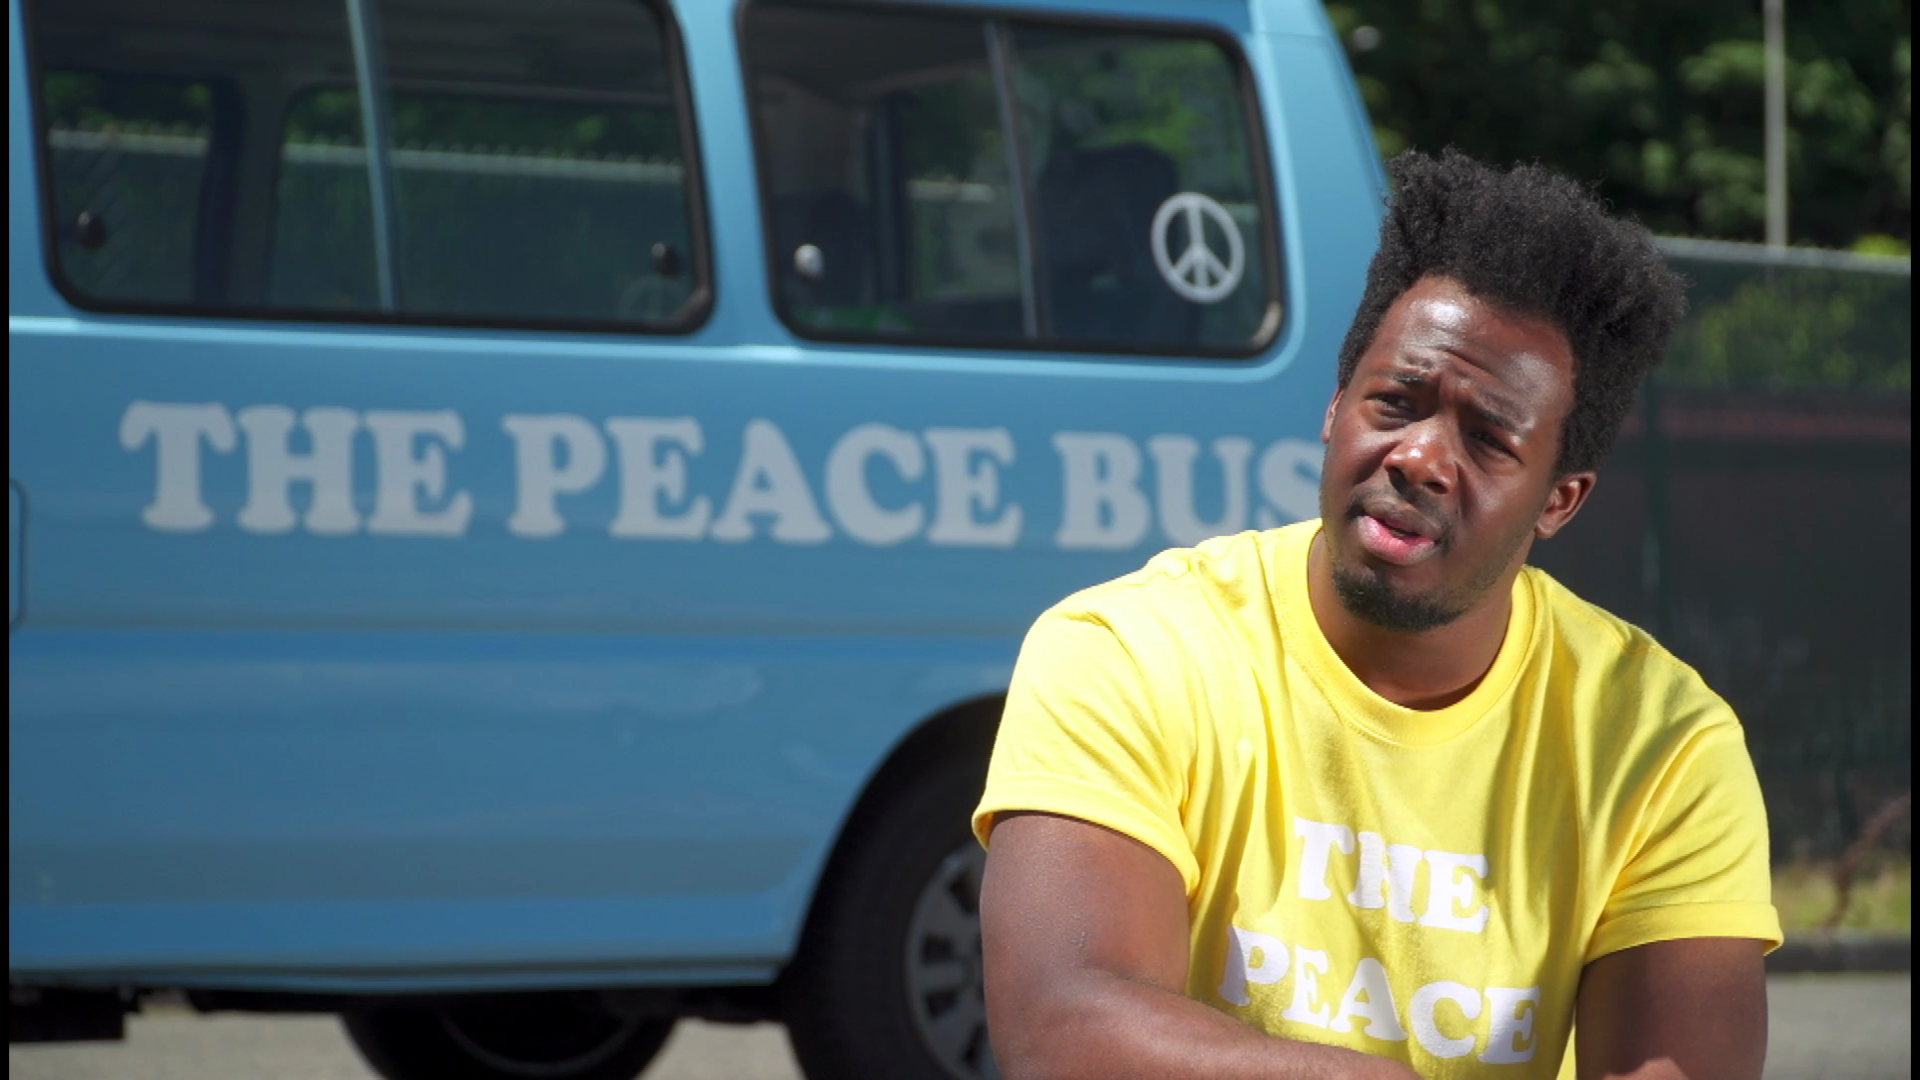 "Peace Bus" activist Kwabi Amoah-Forson says there's a place for hope and optimism.